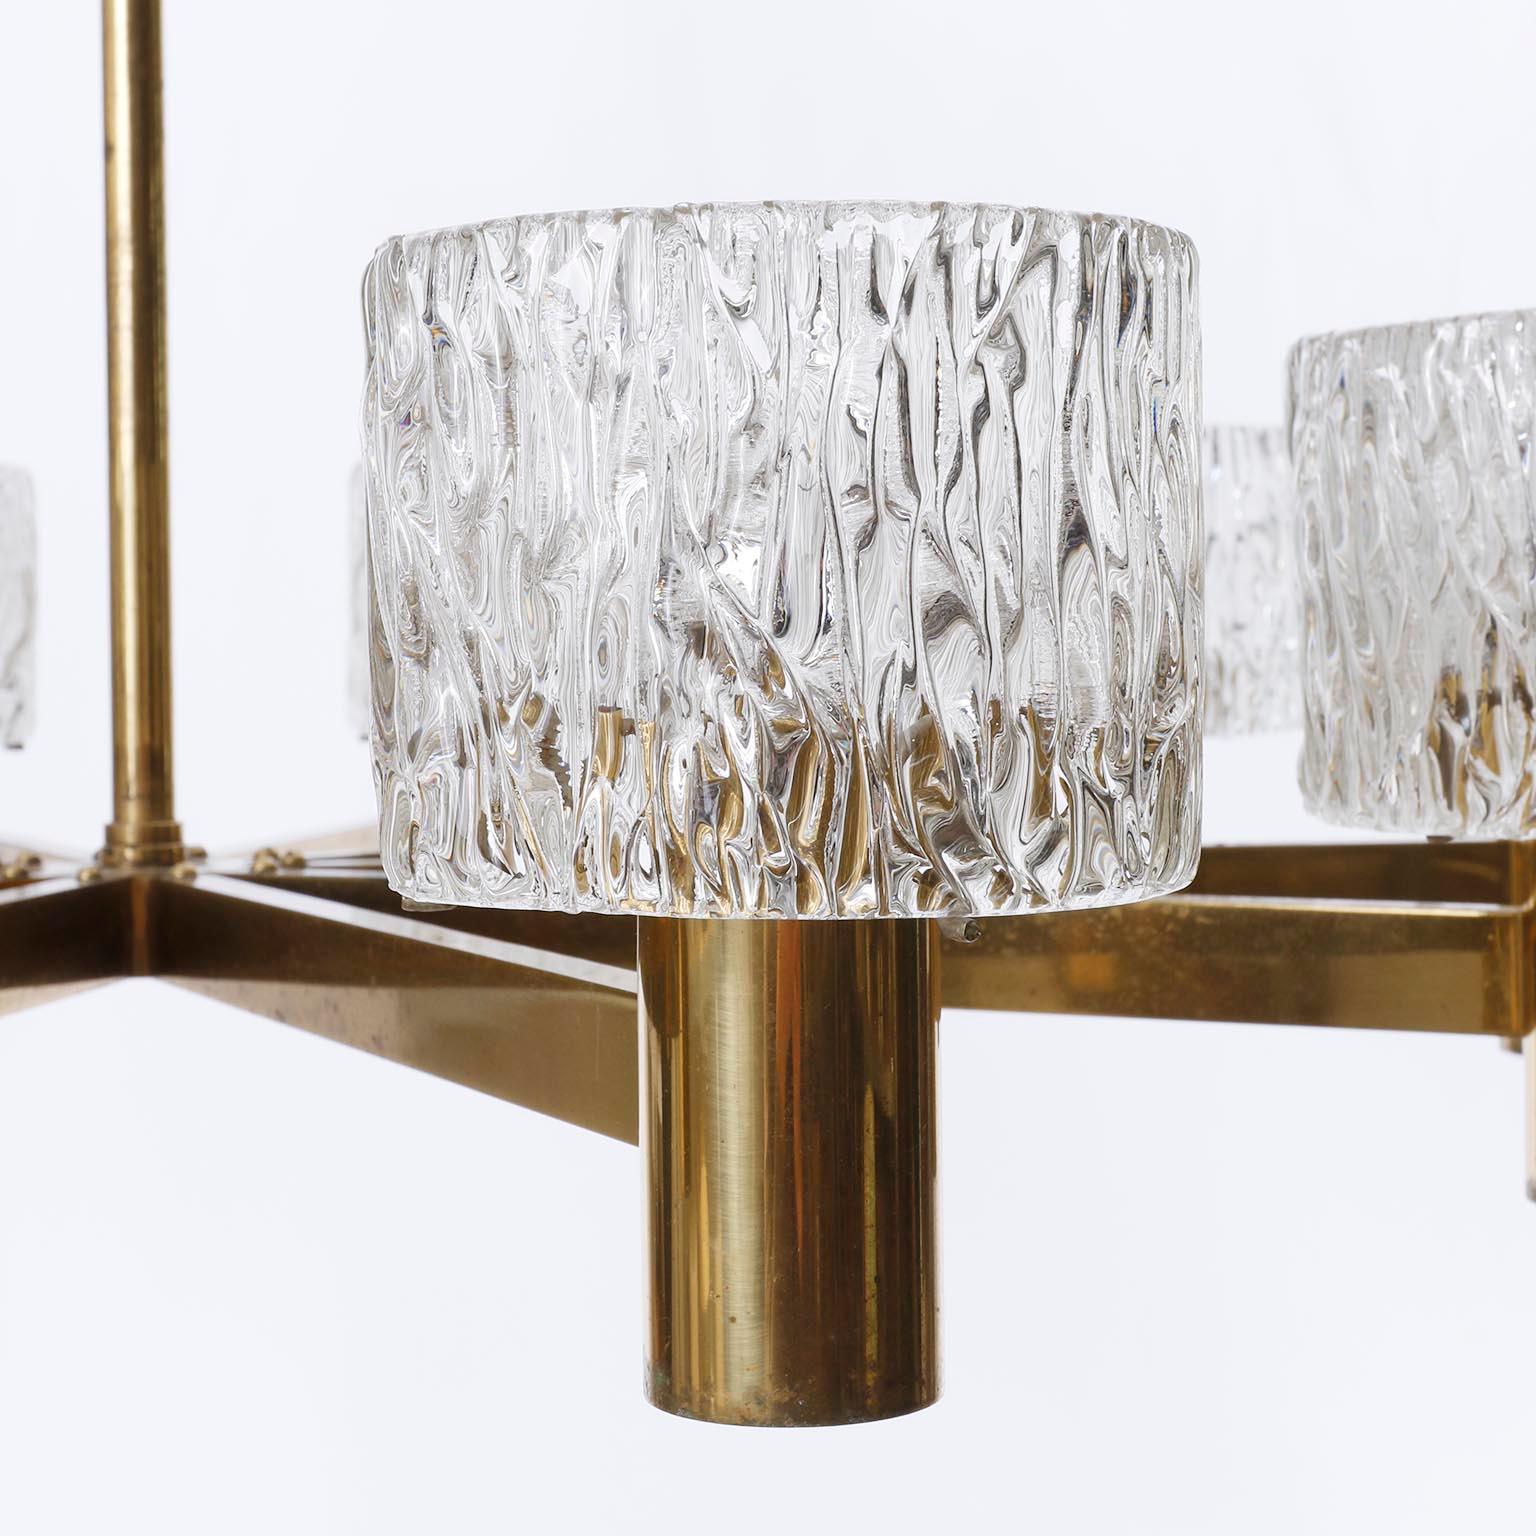 Large 10-Arm Chandelier by J.T. Kalmar, Brass and Textured Pressed Glass, 1960s For Sale 2